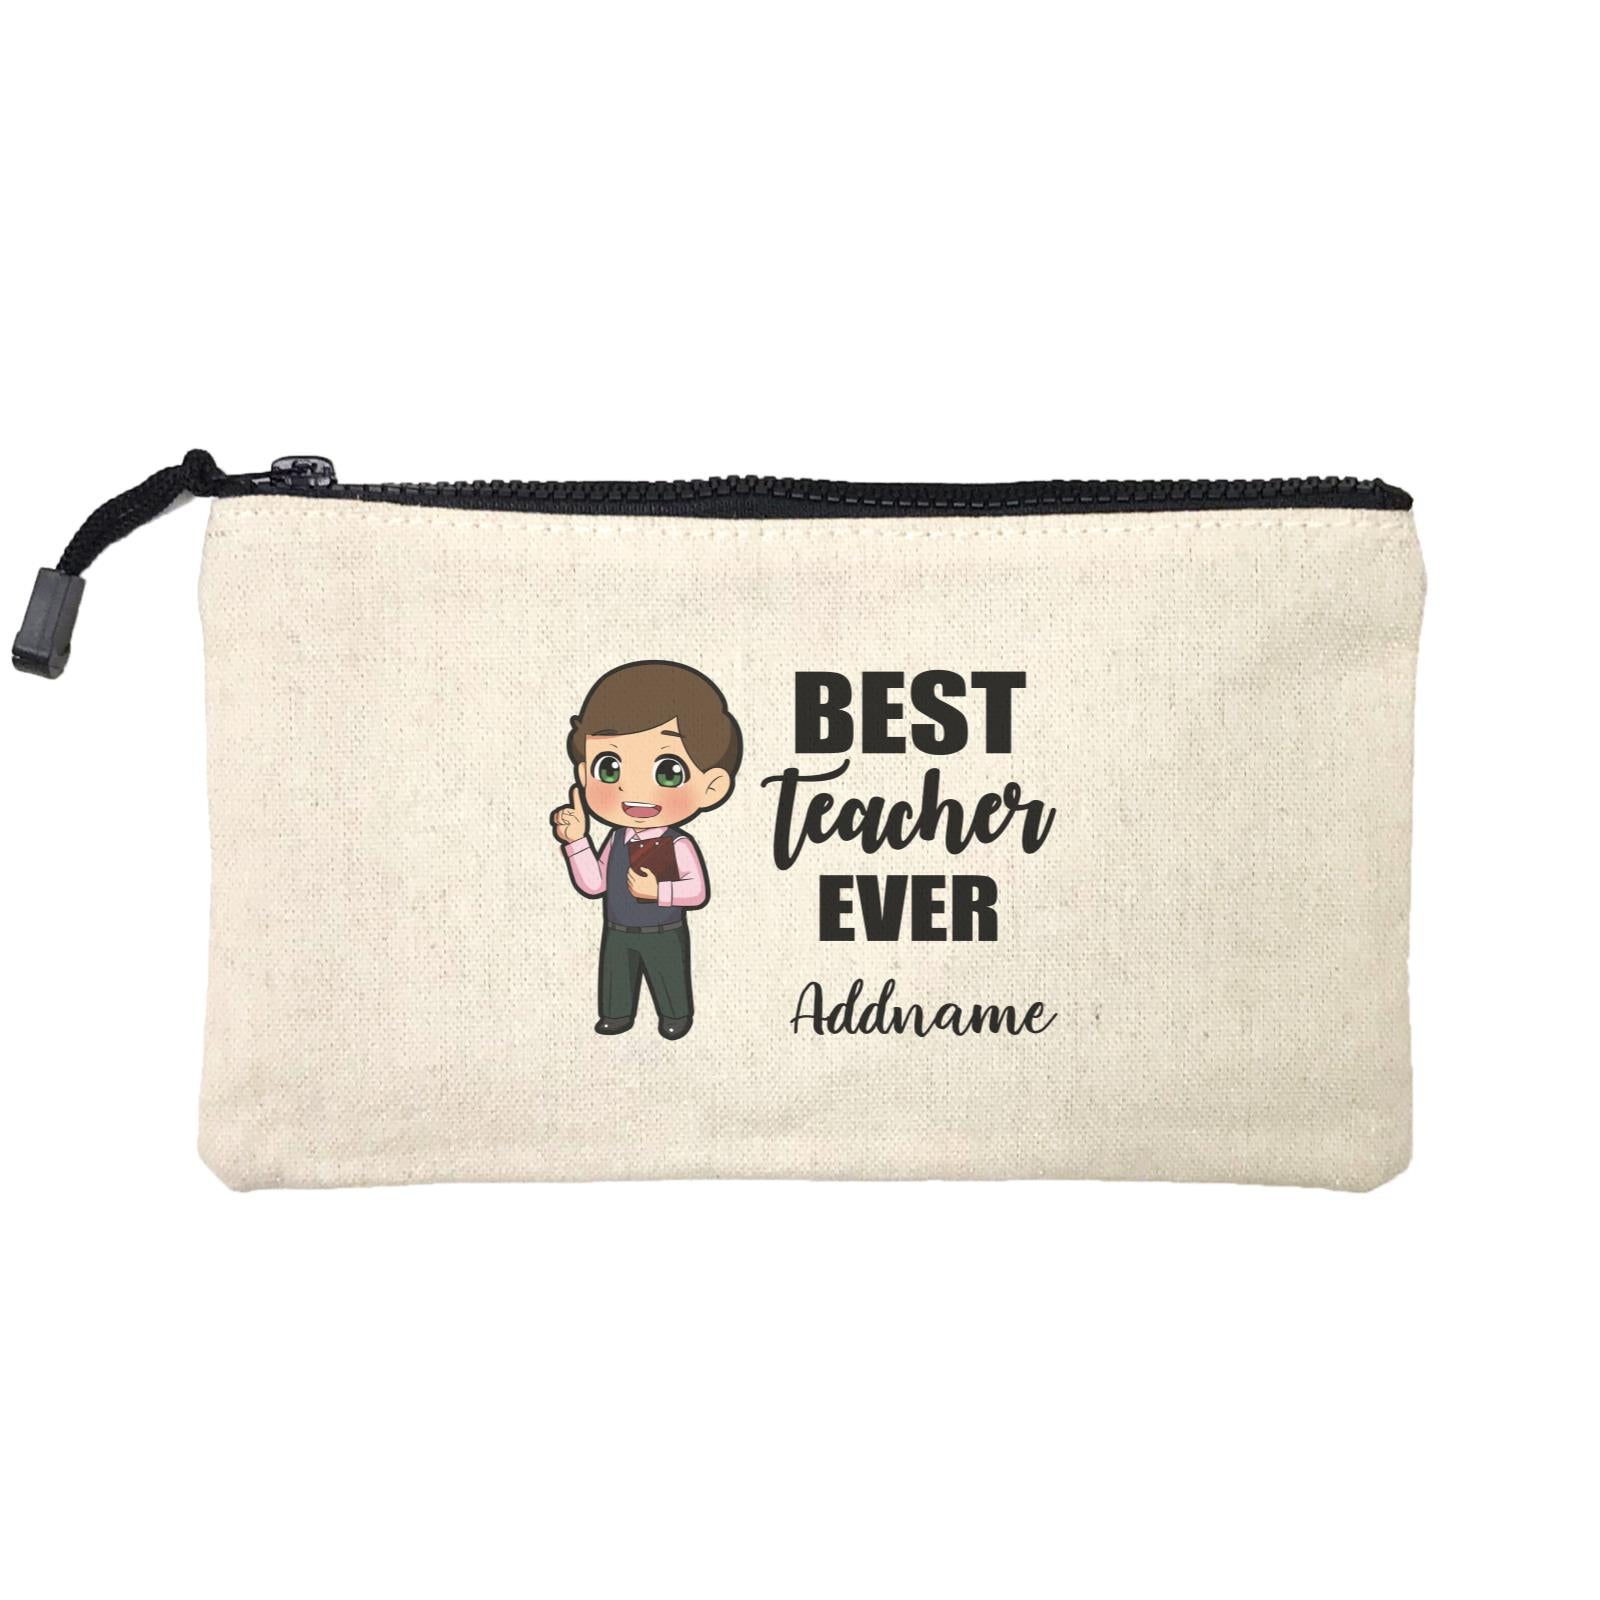 Chibi Teachers Chinese Man Best Teacher Ever Addname Mini Accessories Stationery Pouch